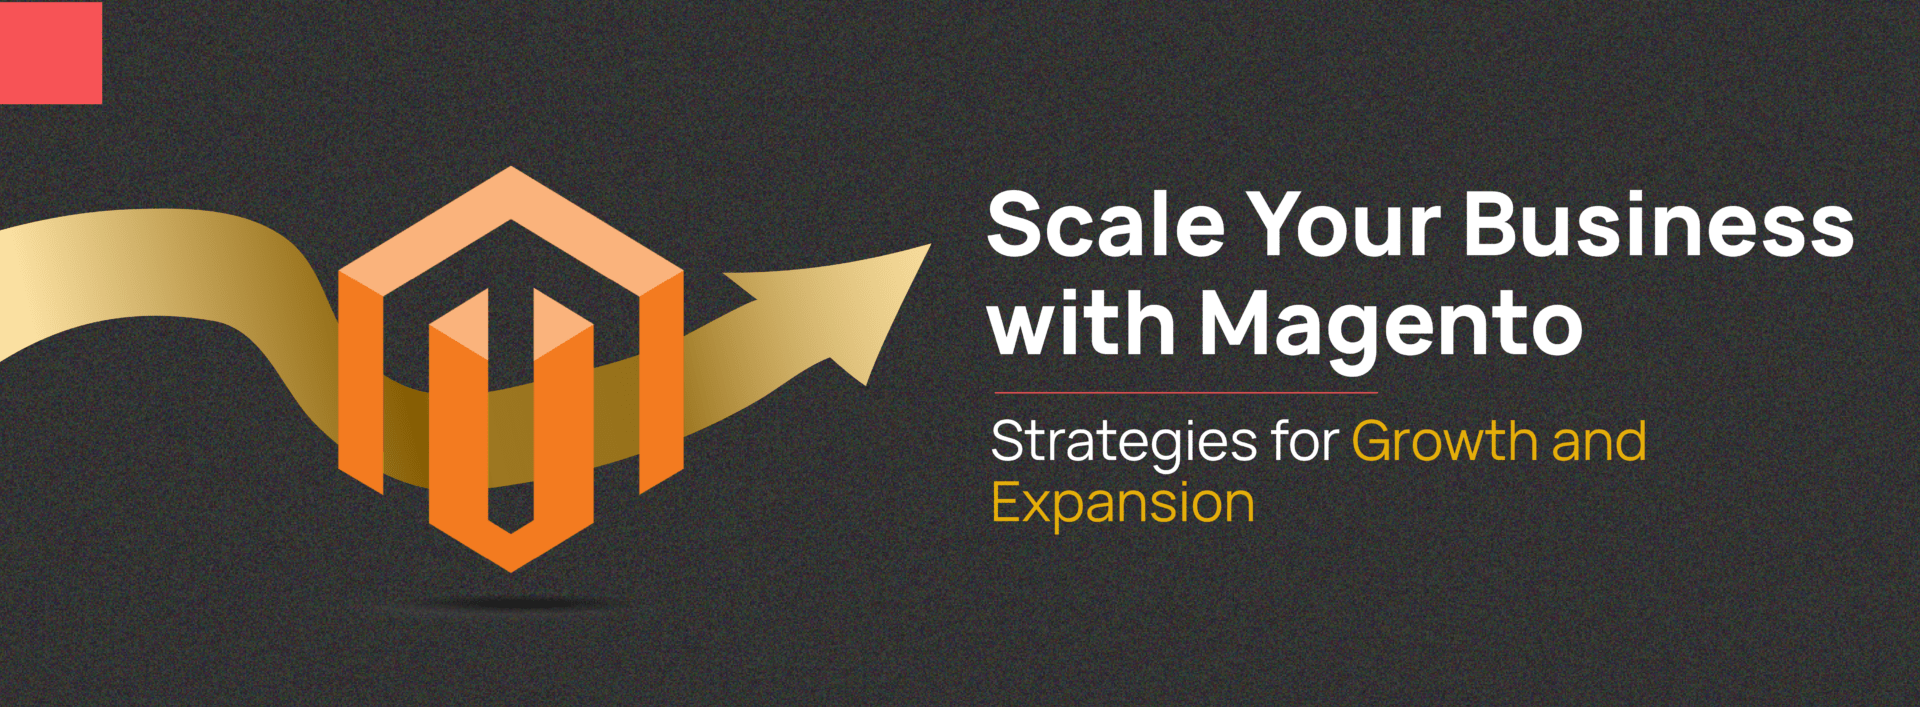 Scaling your business with magento